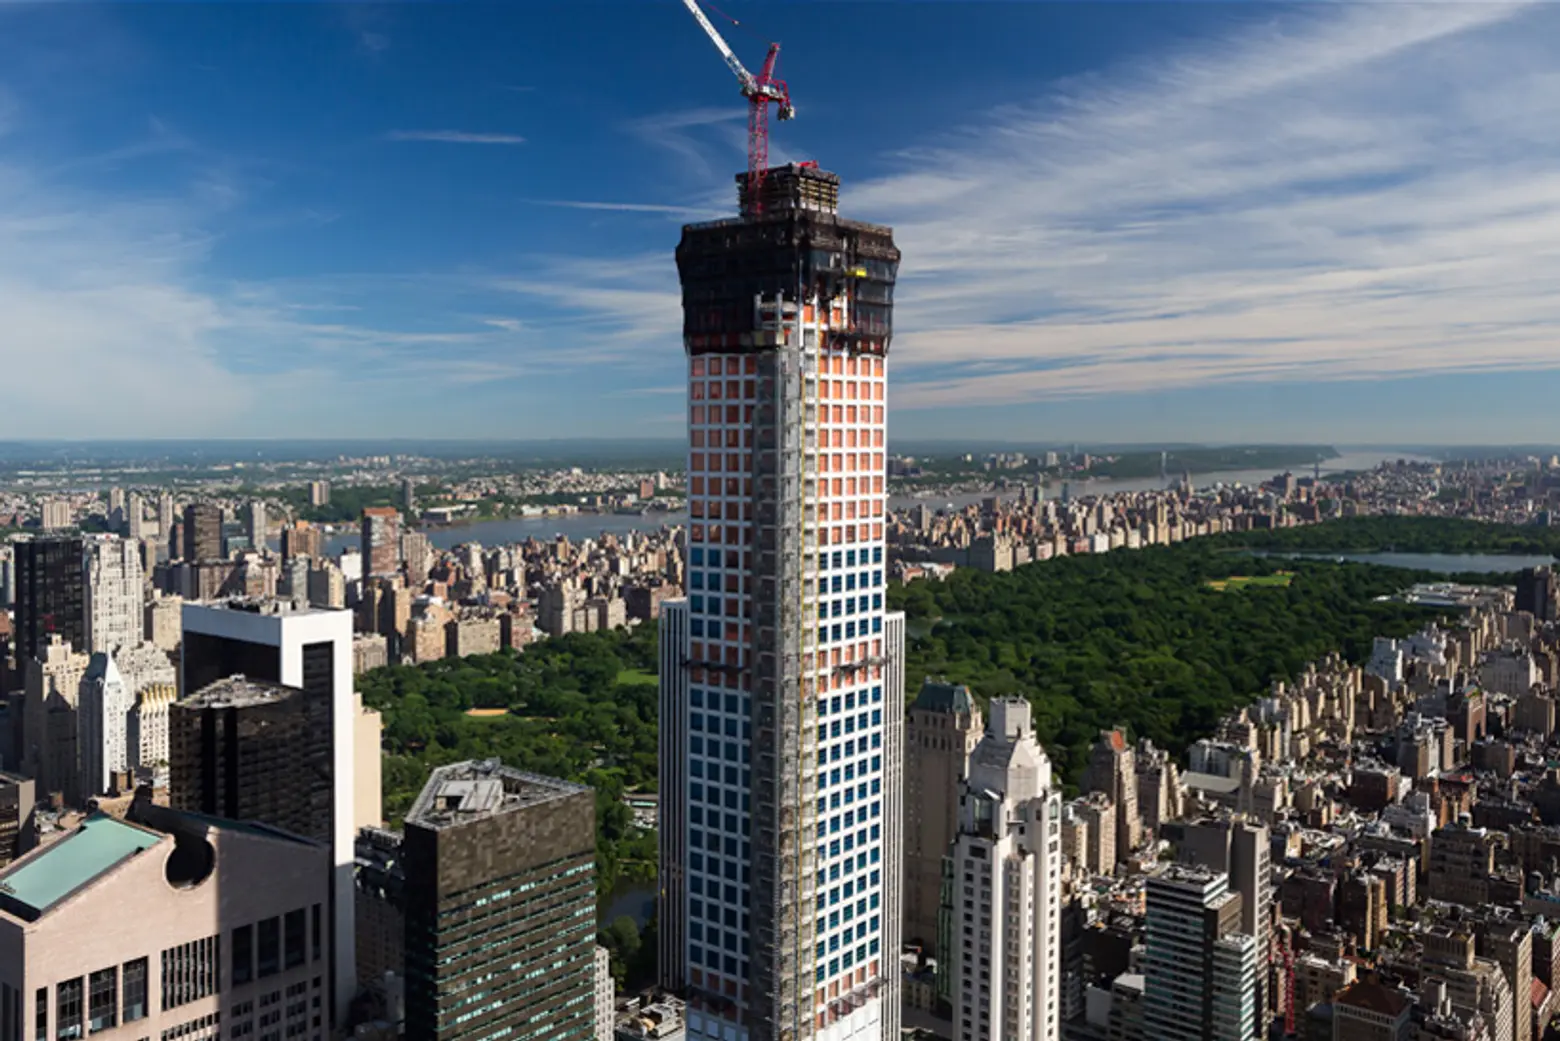 432 Park Will Offer Office Space; Heidi Klum May Purchase $11M Island